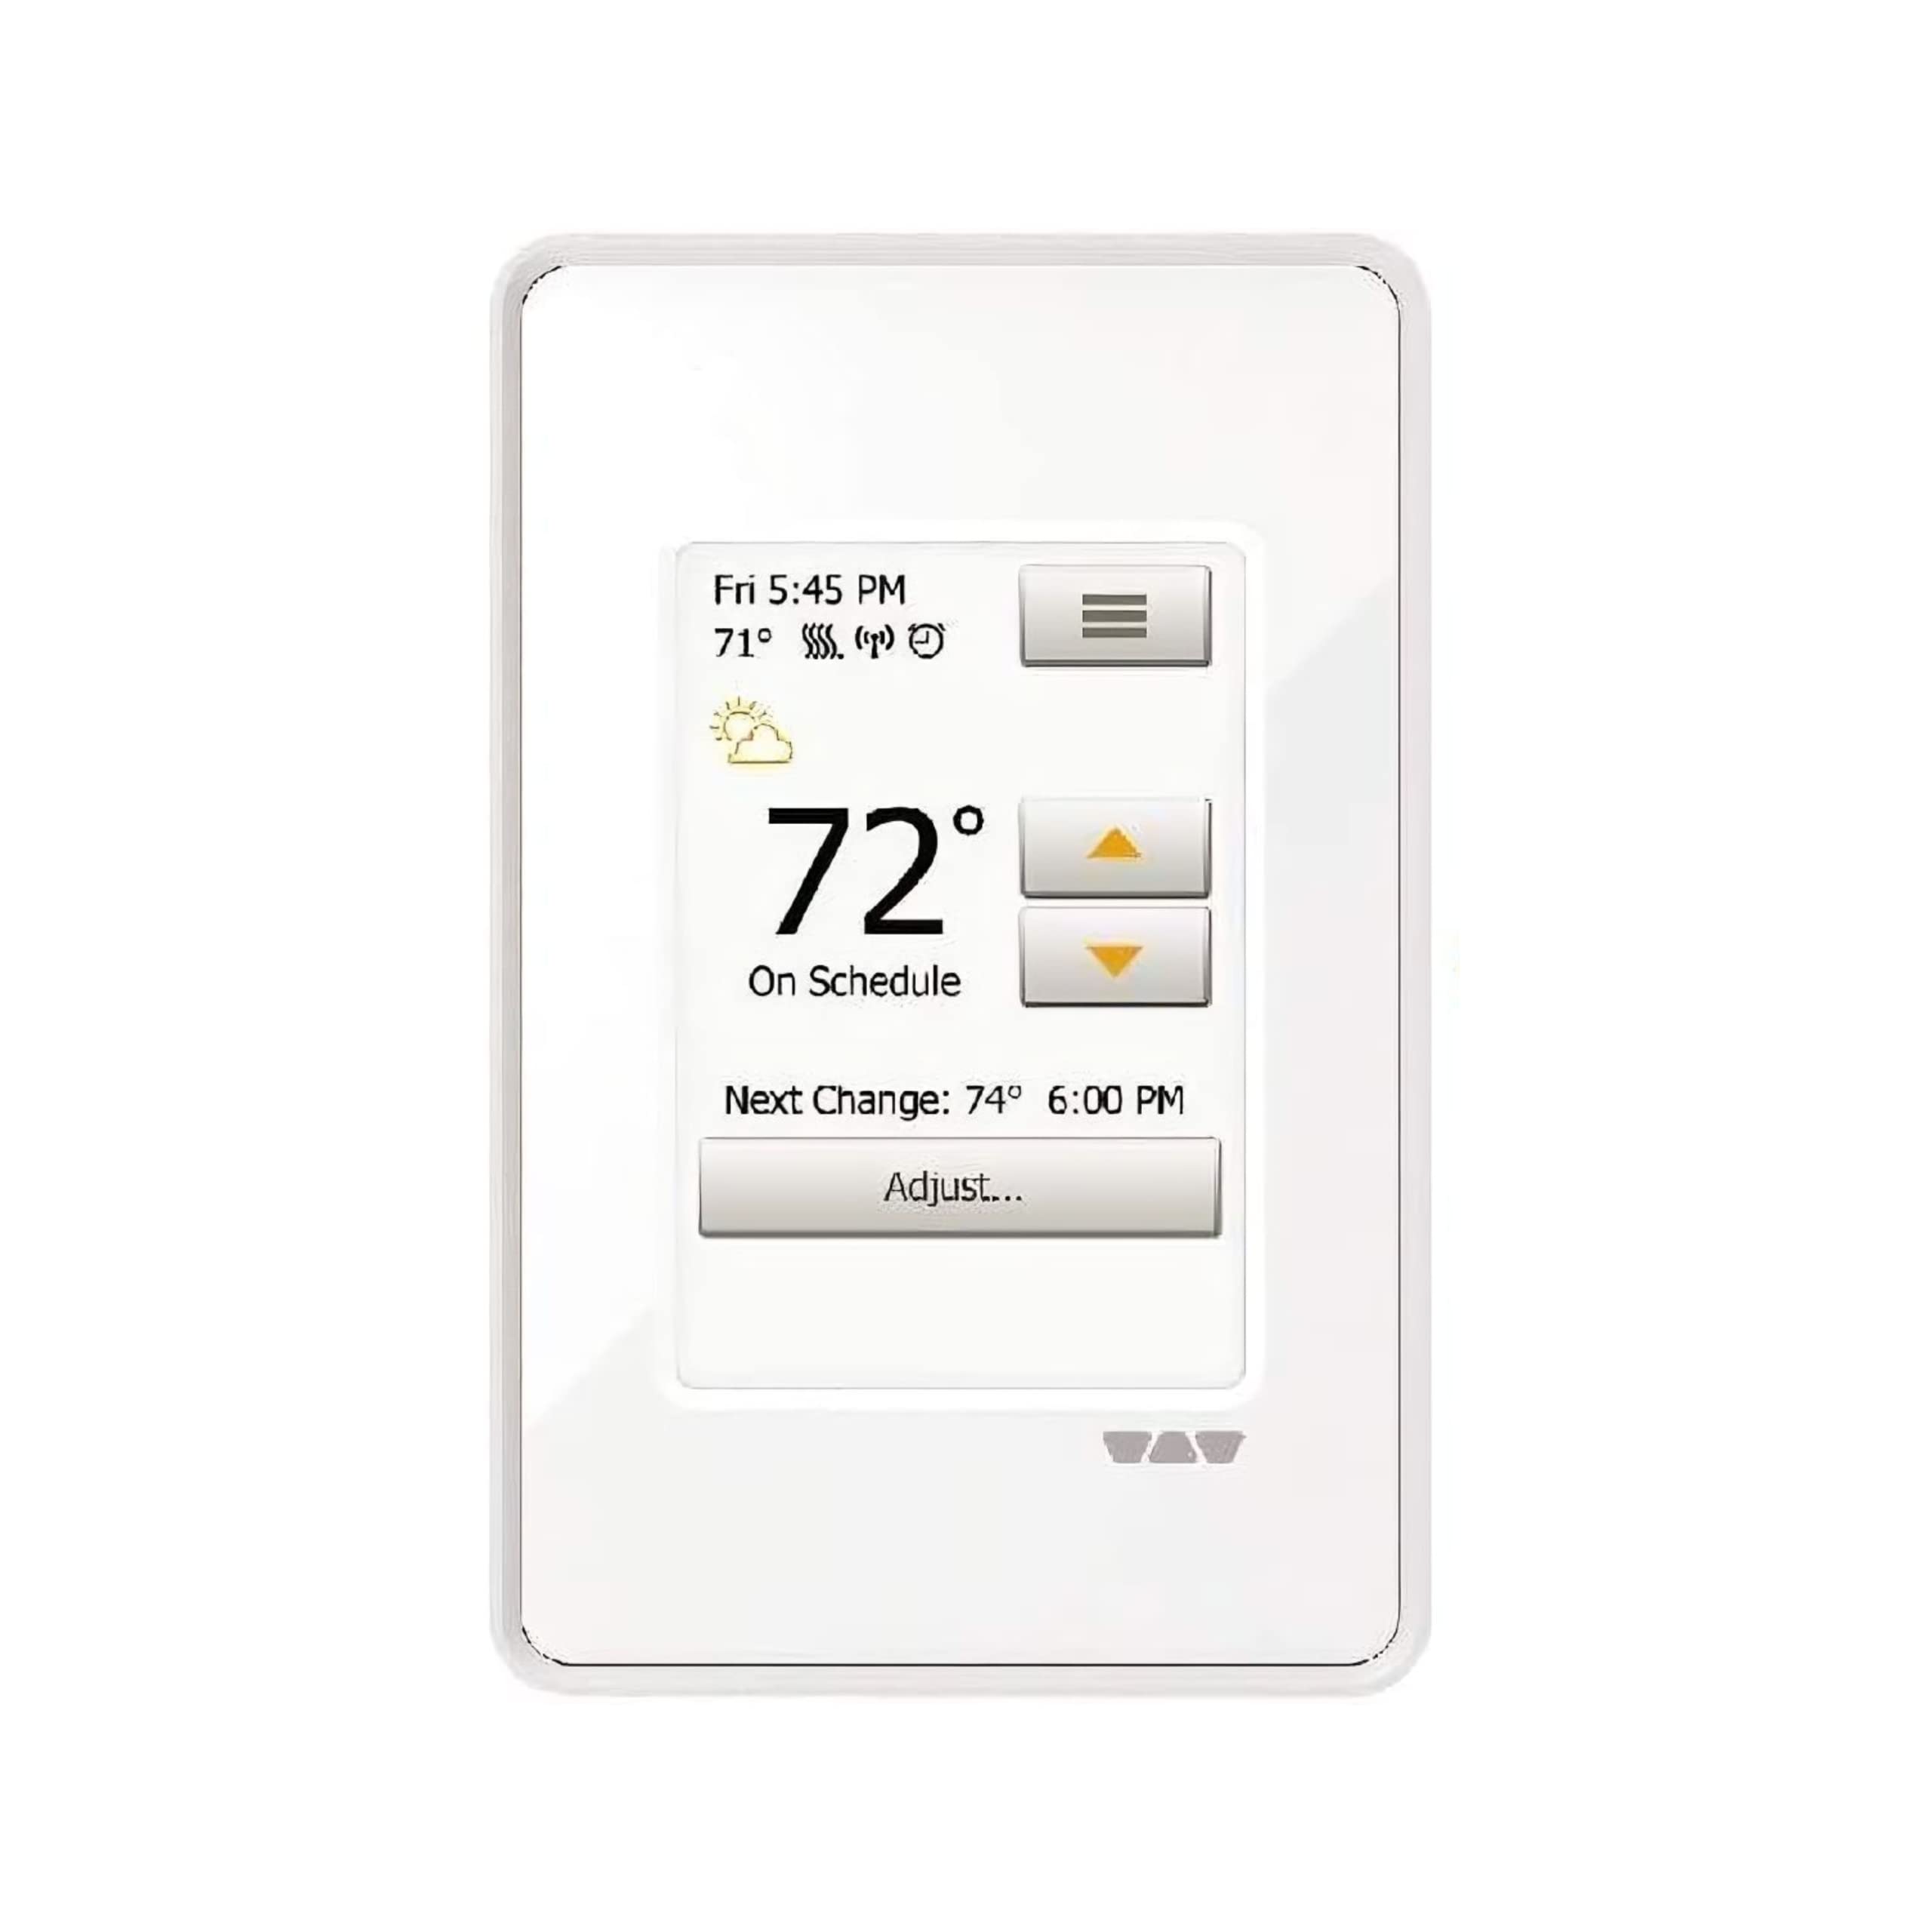 Schluter Systems Ditra Heat Flooring Installation Kit : Touchscreen Programmable Thermostat, Heated Cable 120V 64 Sq Ft, Underlayment Uncoupling Membrane 92.4 (11x 8.4 Mat), DHEKRT_120V_ 64SF